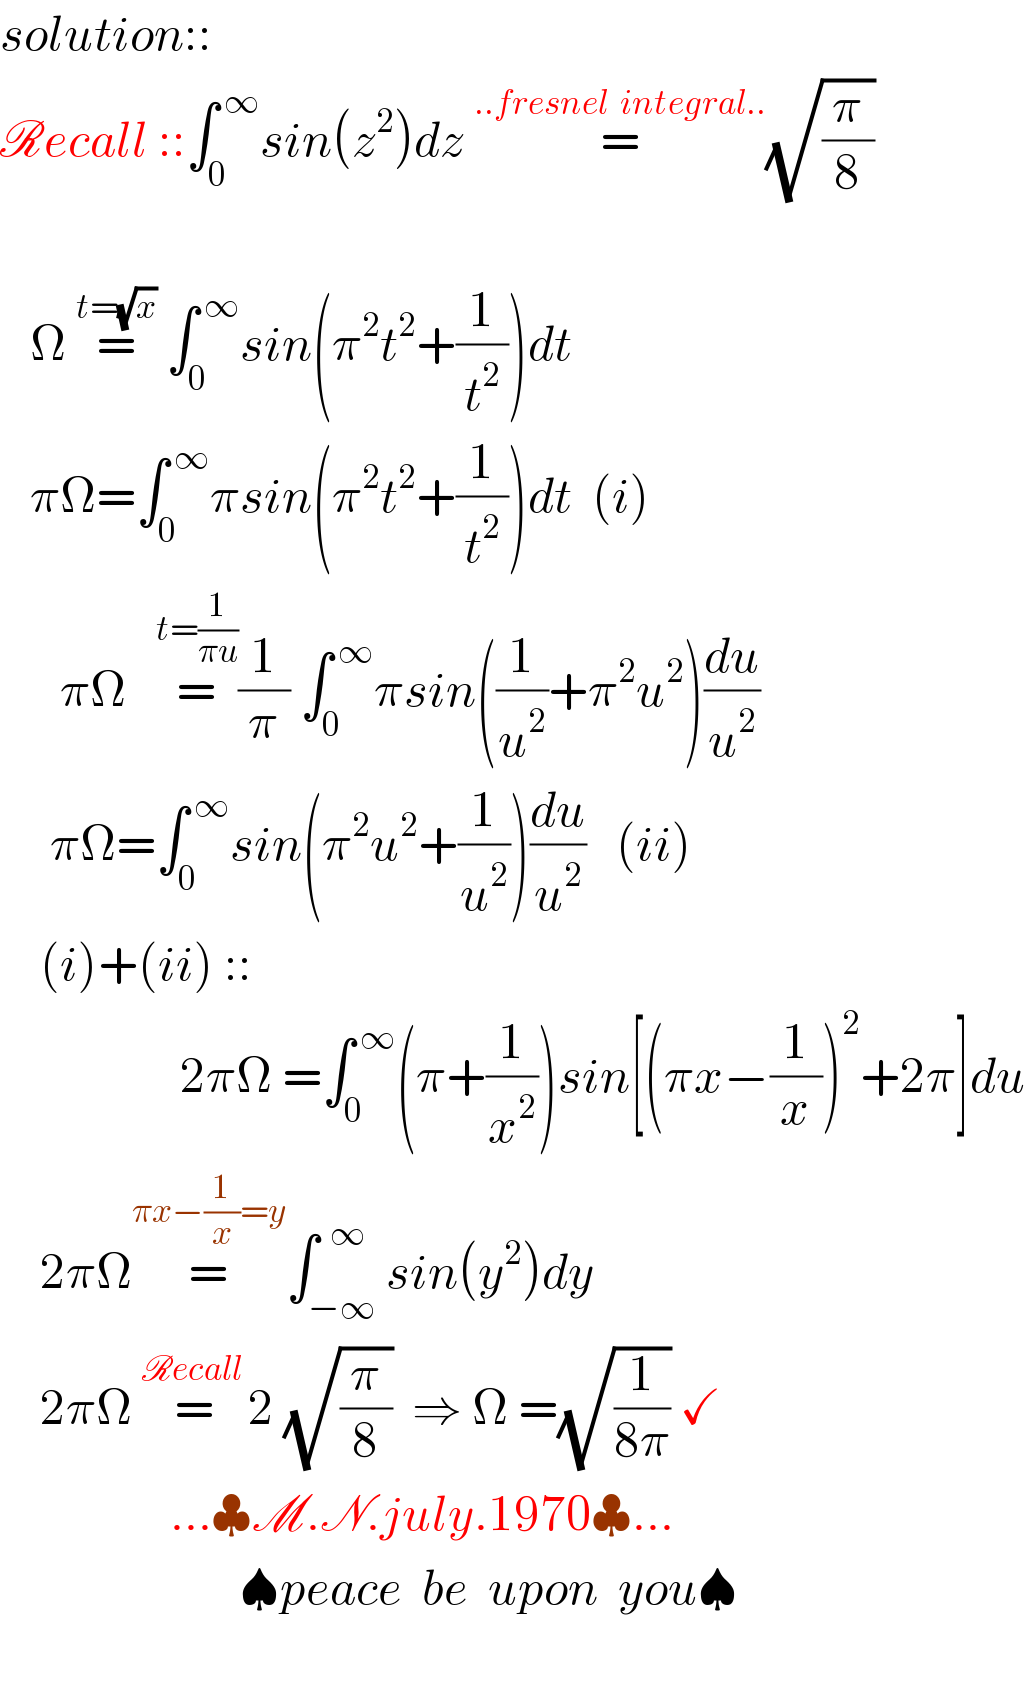 solution::  Recall ::∫_0 ^( ∞) sin(z^2 )dz =^(..fresnel  integral..) (√(π/8))           Ω =^(t=(√x))  ∫_0 ^( ∞) sin(π^2 t^2 +(1/t^2 ))dt       πΩ=∫_0 ^( ∞) πsin(π^2 t^2 +(1/t^2 ))dt  (i)        πΩ   =^(t=(1/(πu))) (1/π) ∫_(0 ) ^( ∞) πsin((1/u^2 )+π^2 u^2 )(du/u^2 )       πΩ=∫_0 ^( ∞) sin(π^2 u^2 +(1/u^2 ))(du/u^2 )   (ii)      (i)+(ii) ::                     2πΩ =∫_0 ^( ∞) (π+(1/x^2 ))sin[(πx−(1/x))^2 +2π]du      2πΩ=^(πx−(1/x)=y) ∫_(−∞) ^(  ∞) sin(y^2 )dy      2πΩ =^(Recall ) 2 (√(π/8))  ⇒ Ω =(√(1/(8π))) ✓                   ...♣M.N.july.1970♣...                          ♠peace  be  upon  you♠      